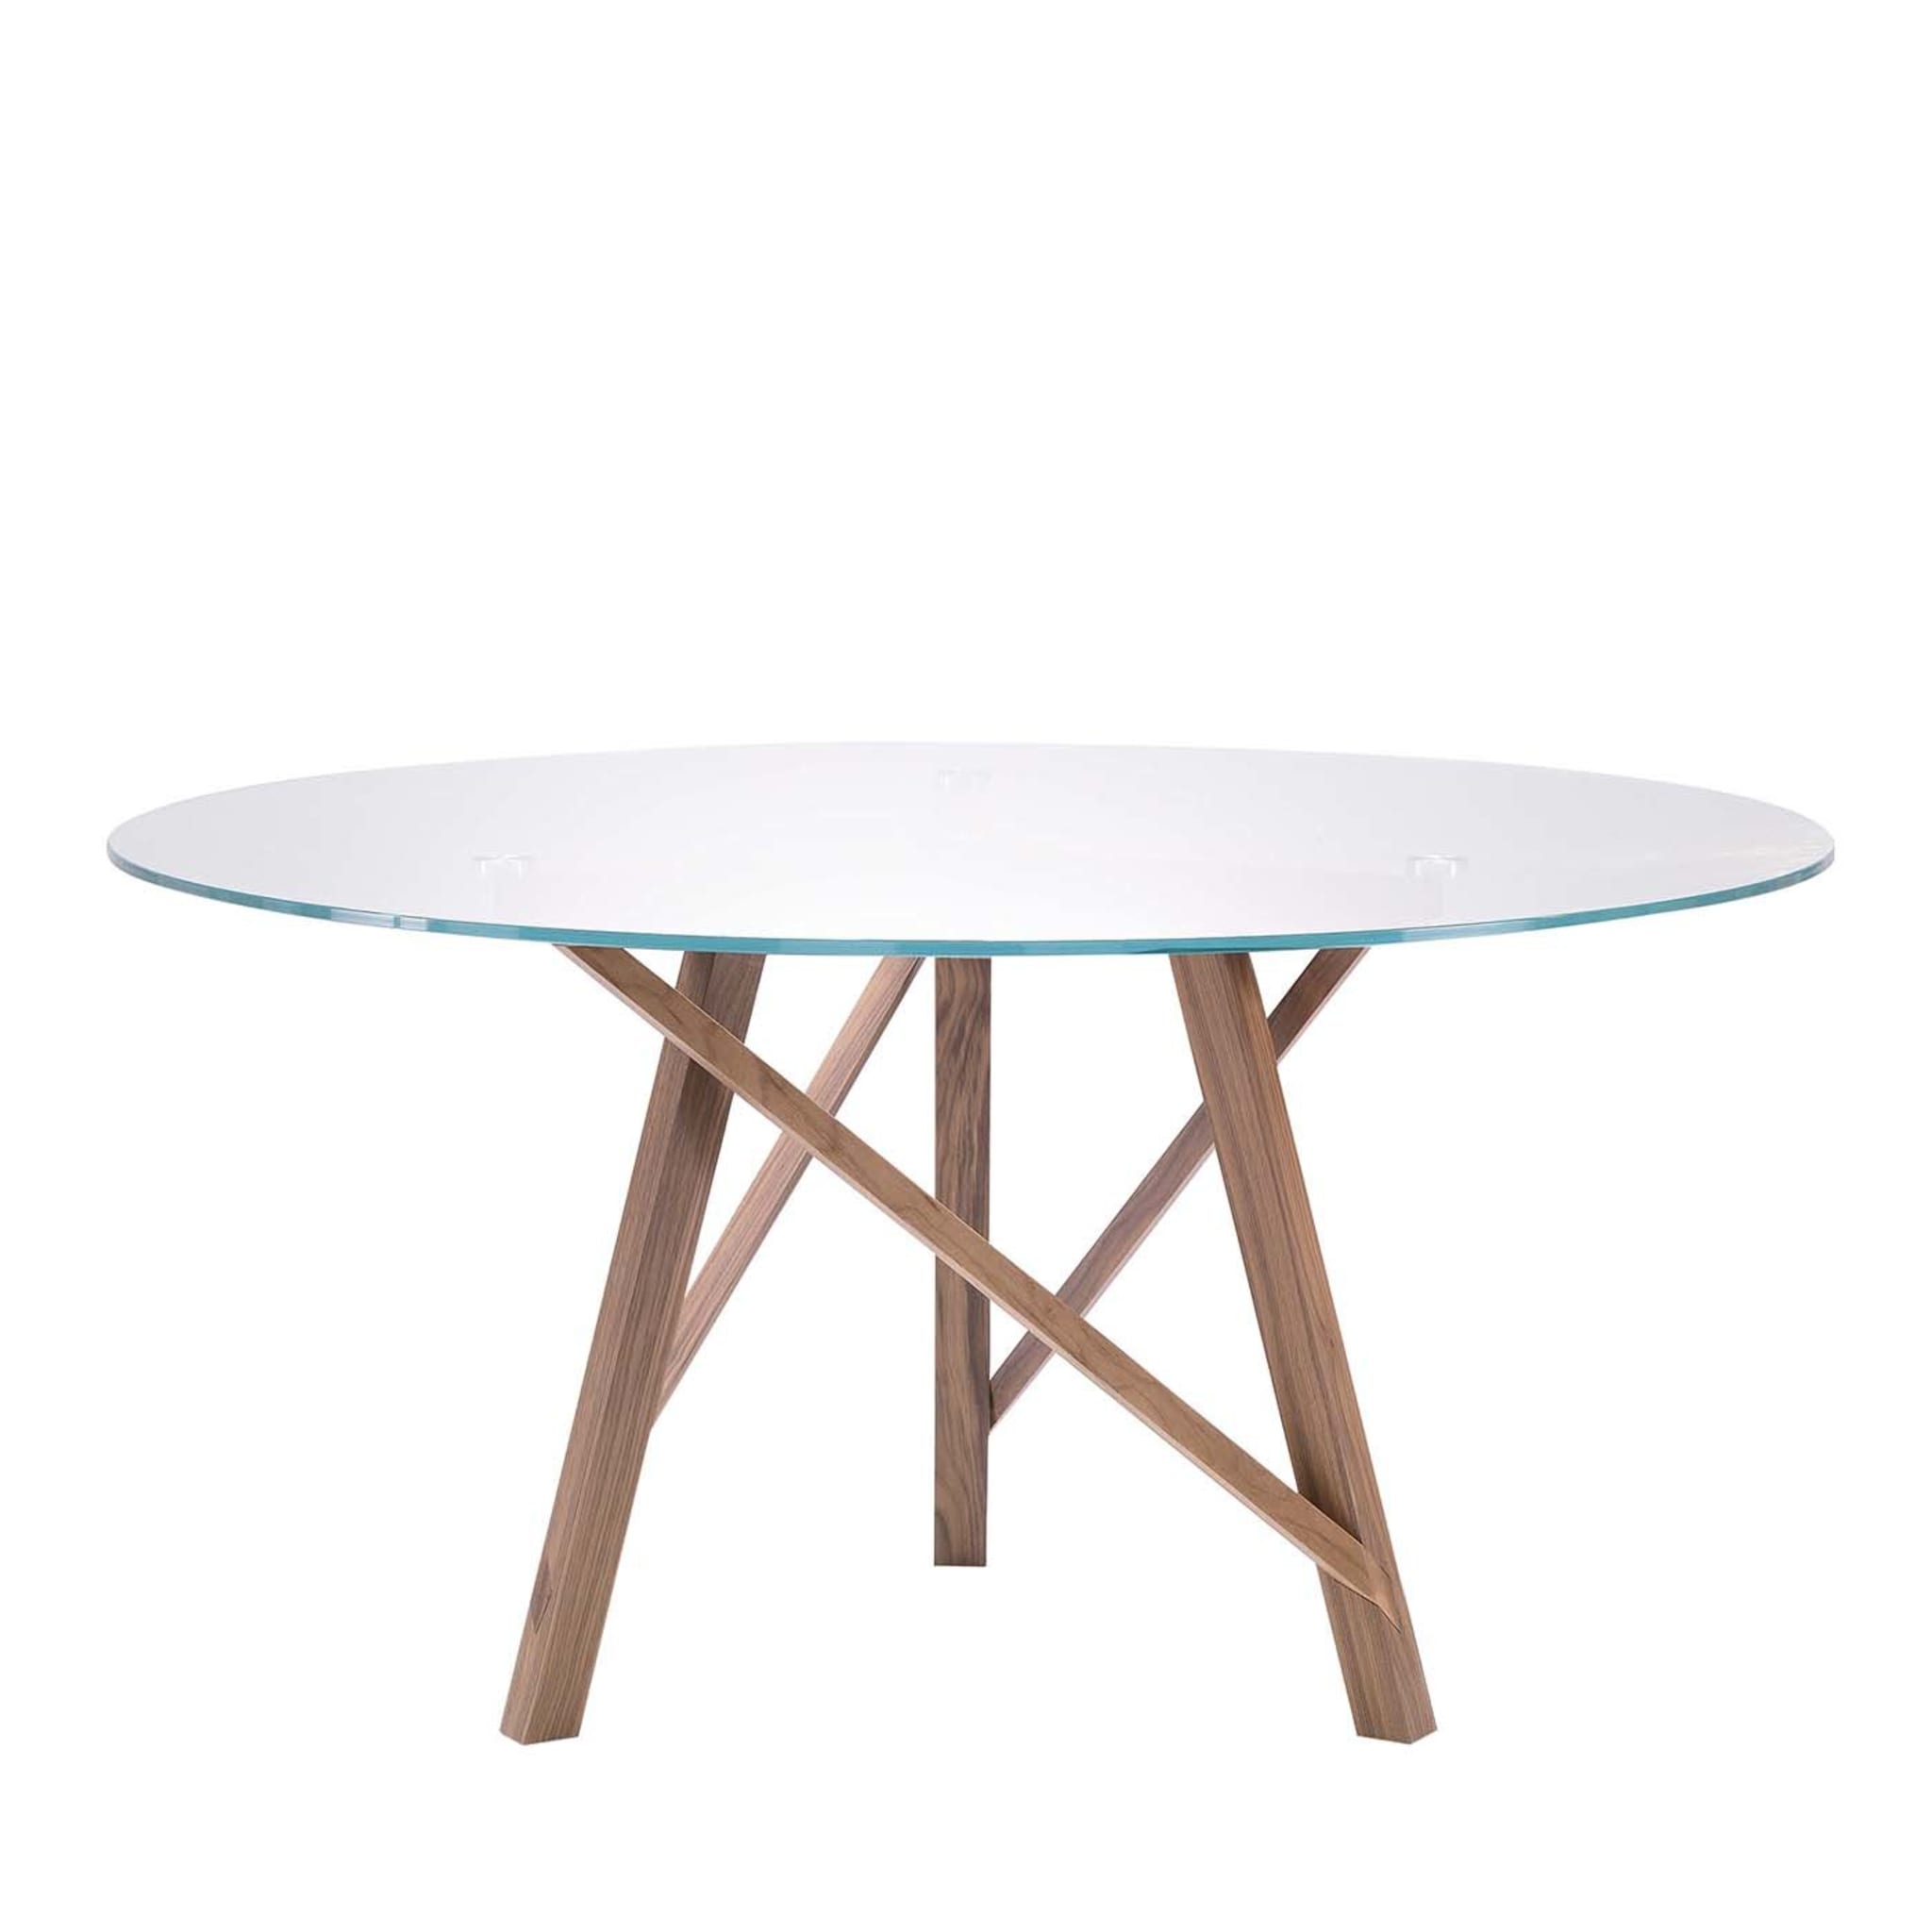 Zeus Round Table by Giuliano and Gabriele Cappelletti - Main view